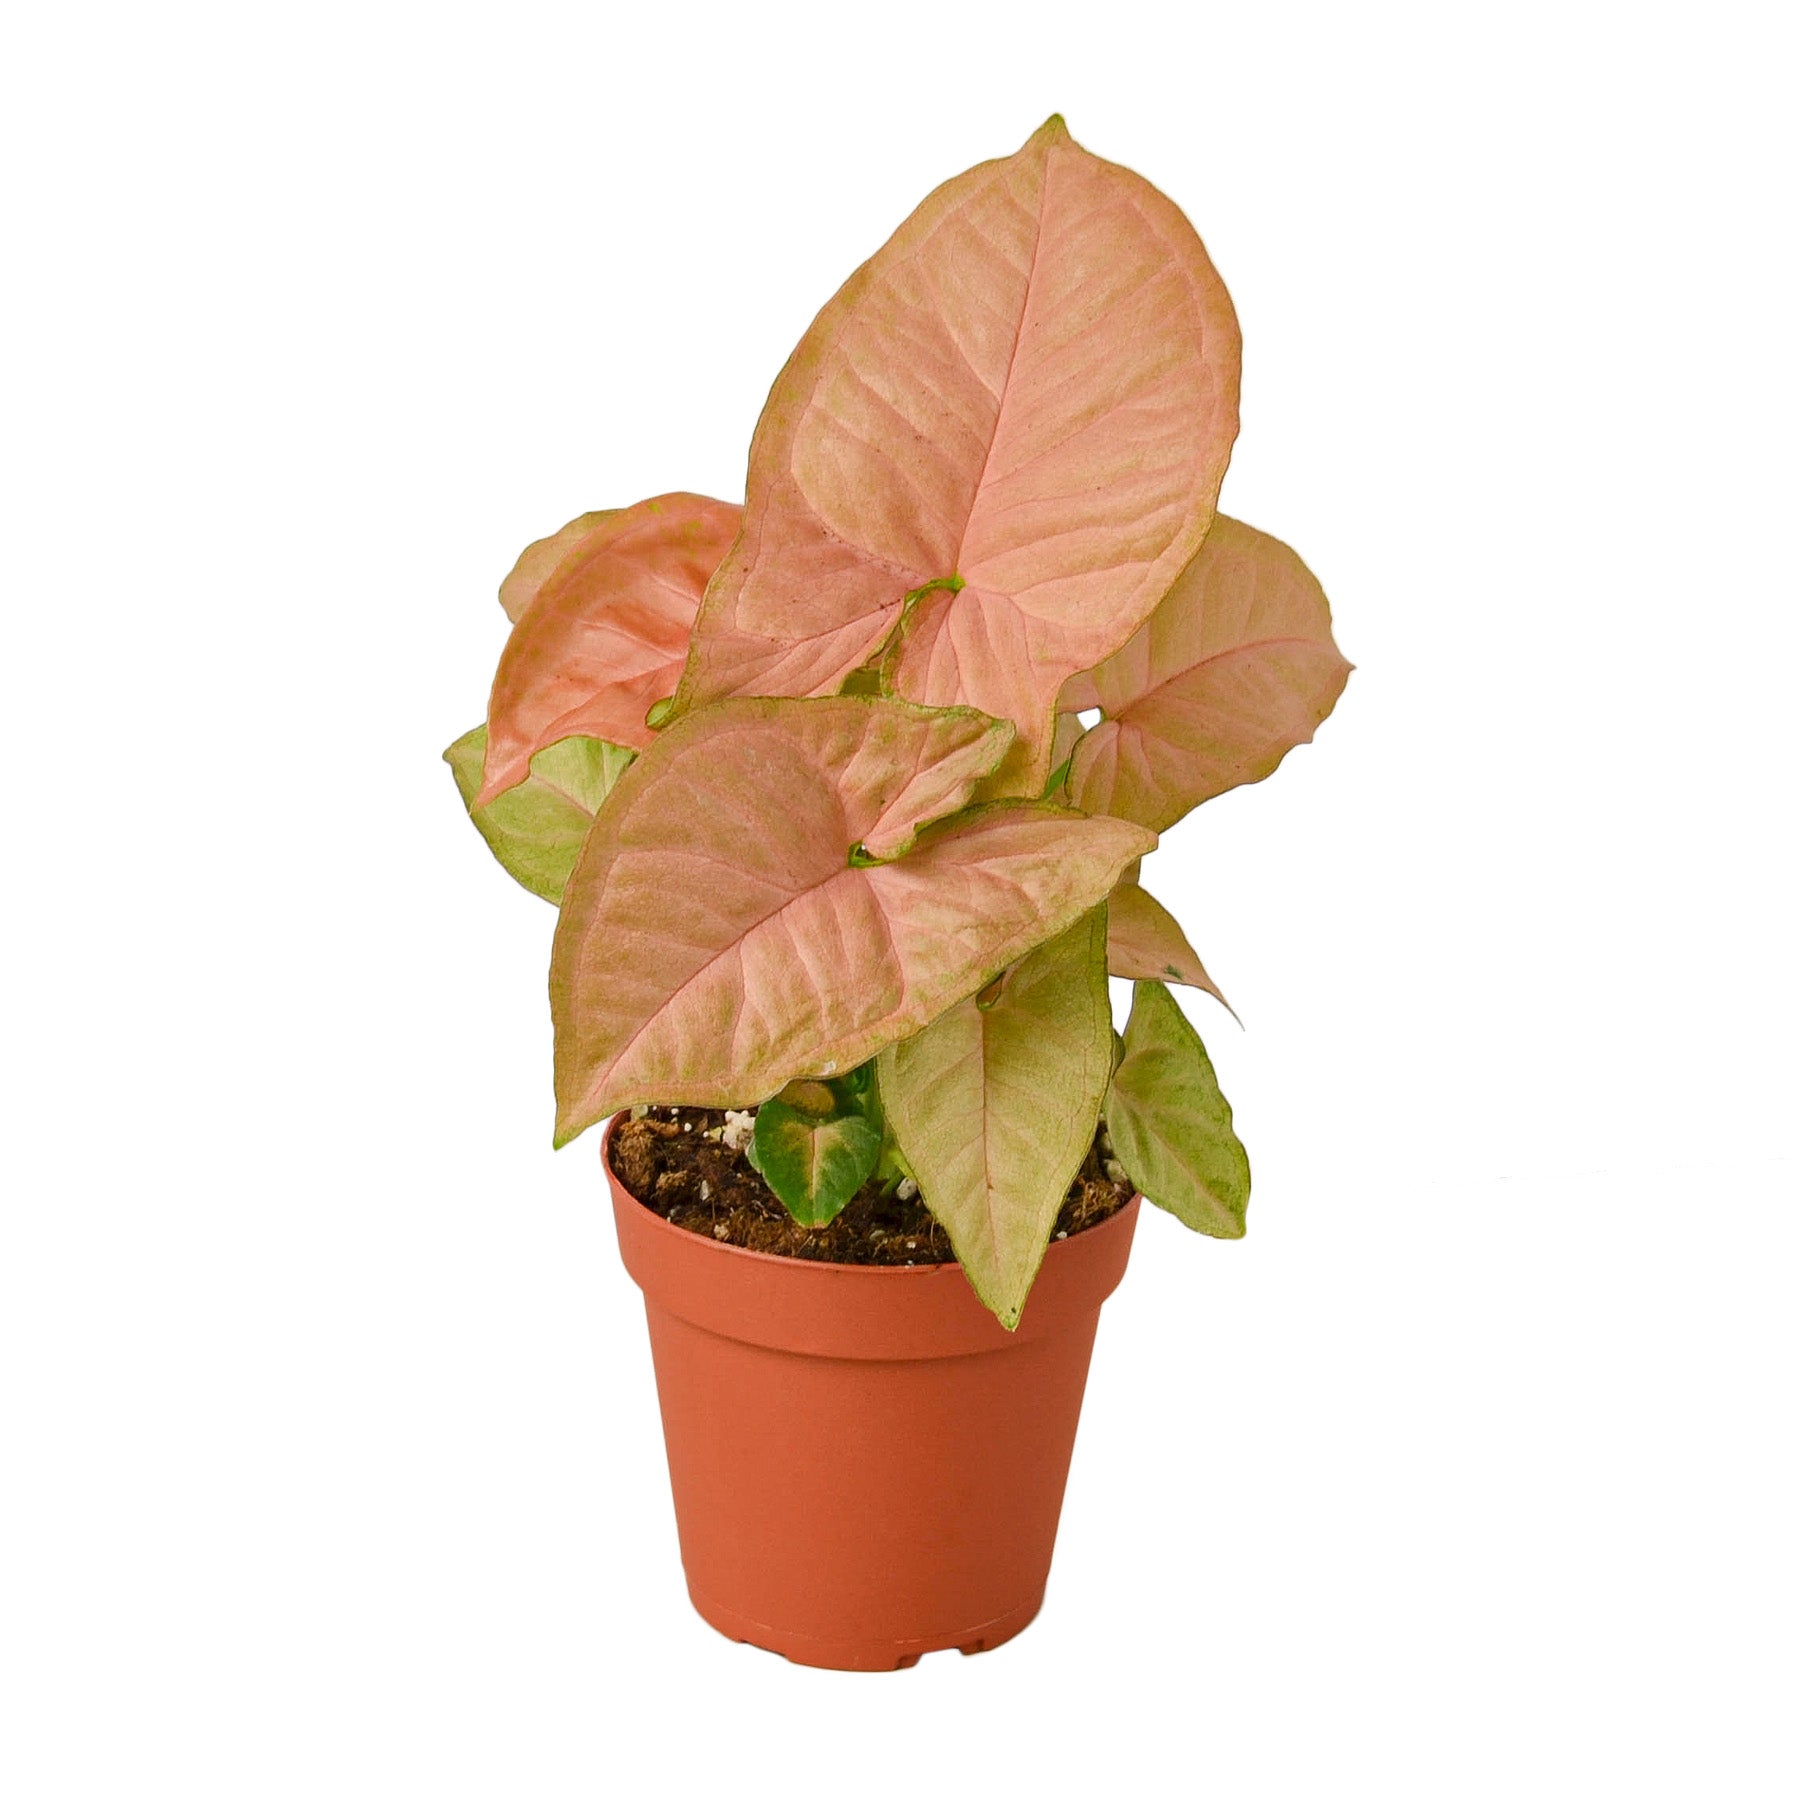 A pink plant in a pot on a white background found at a garden center near me.